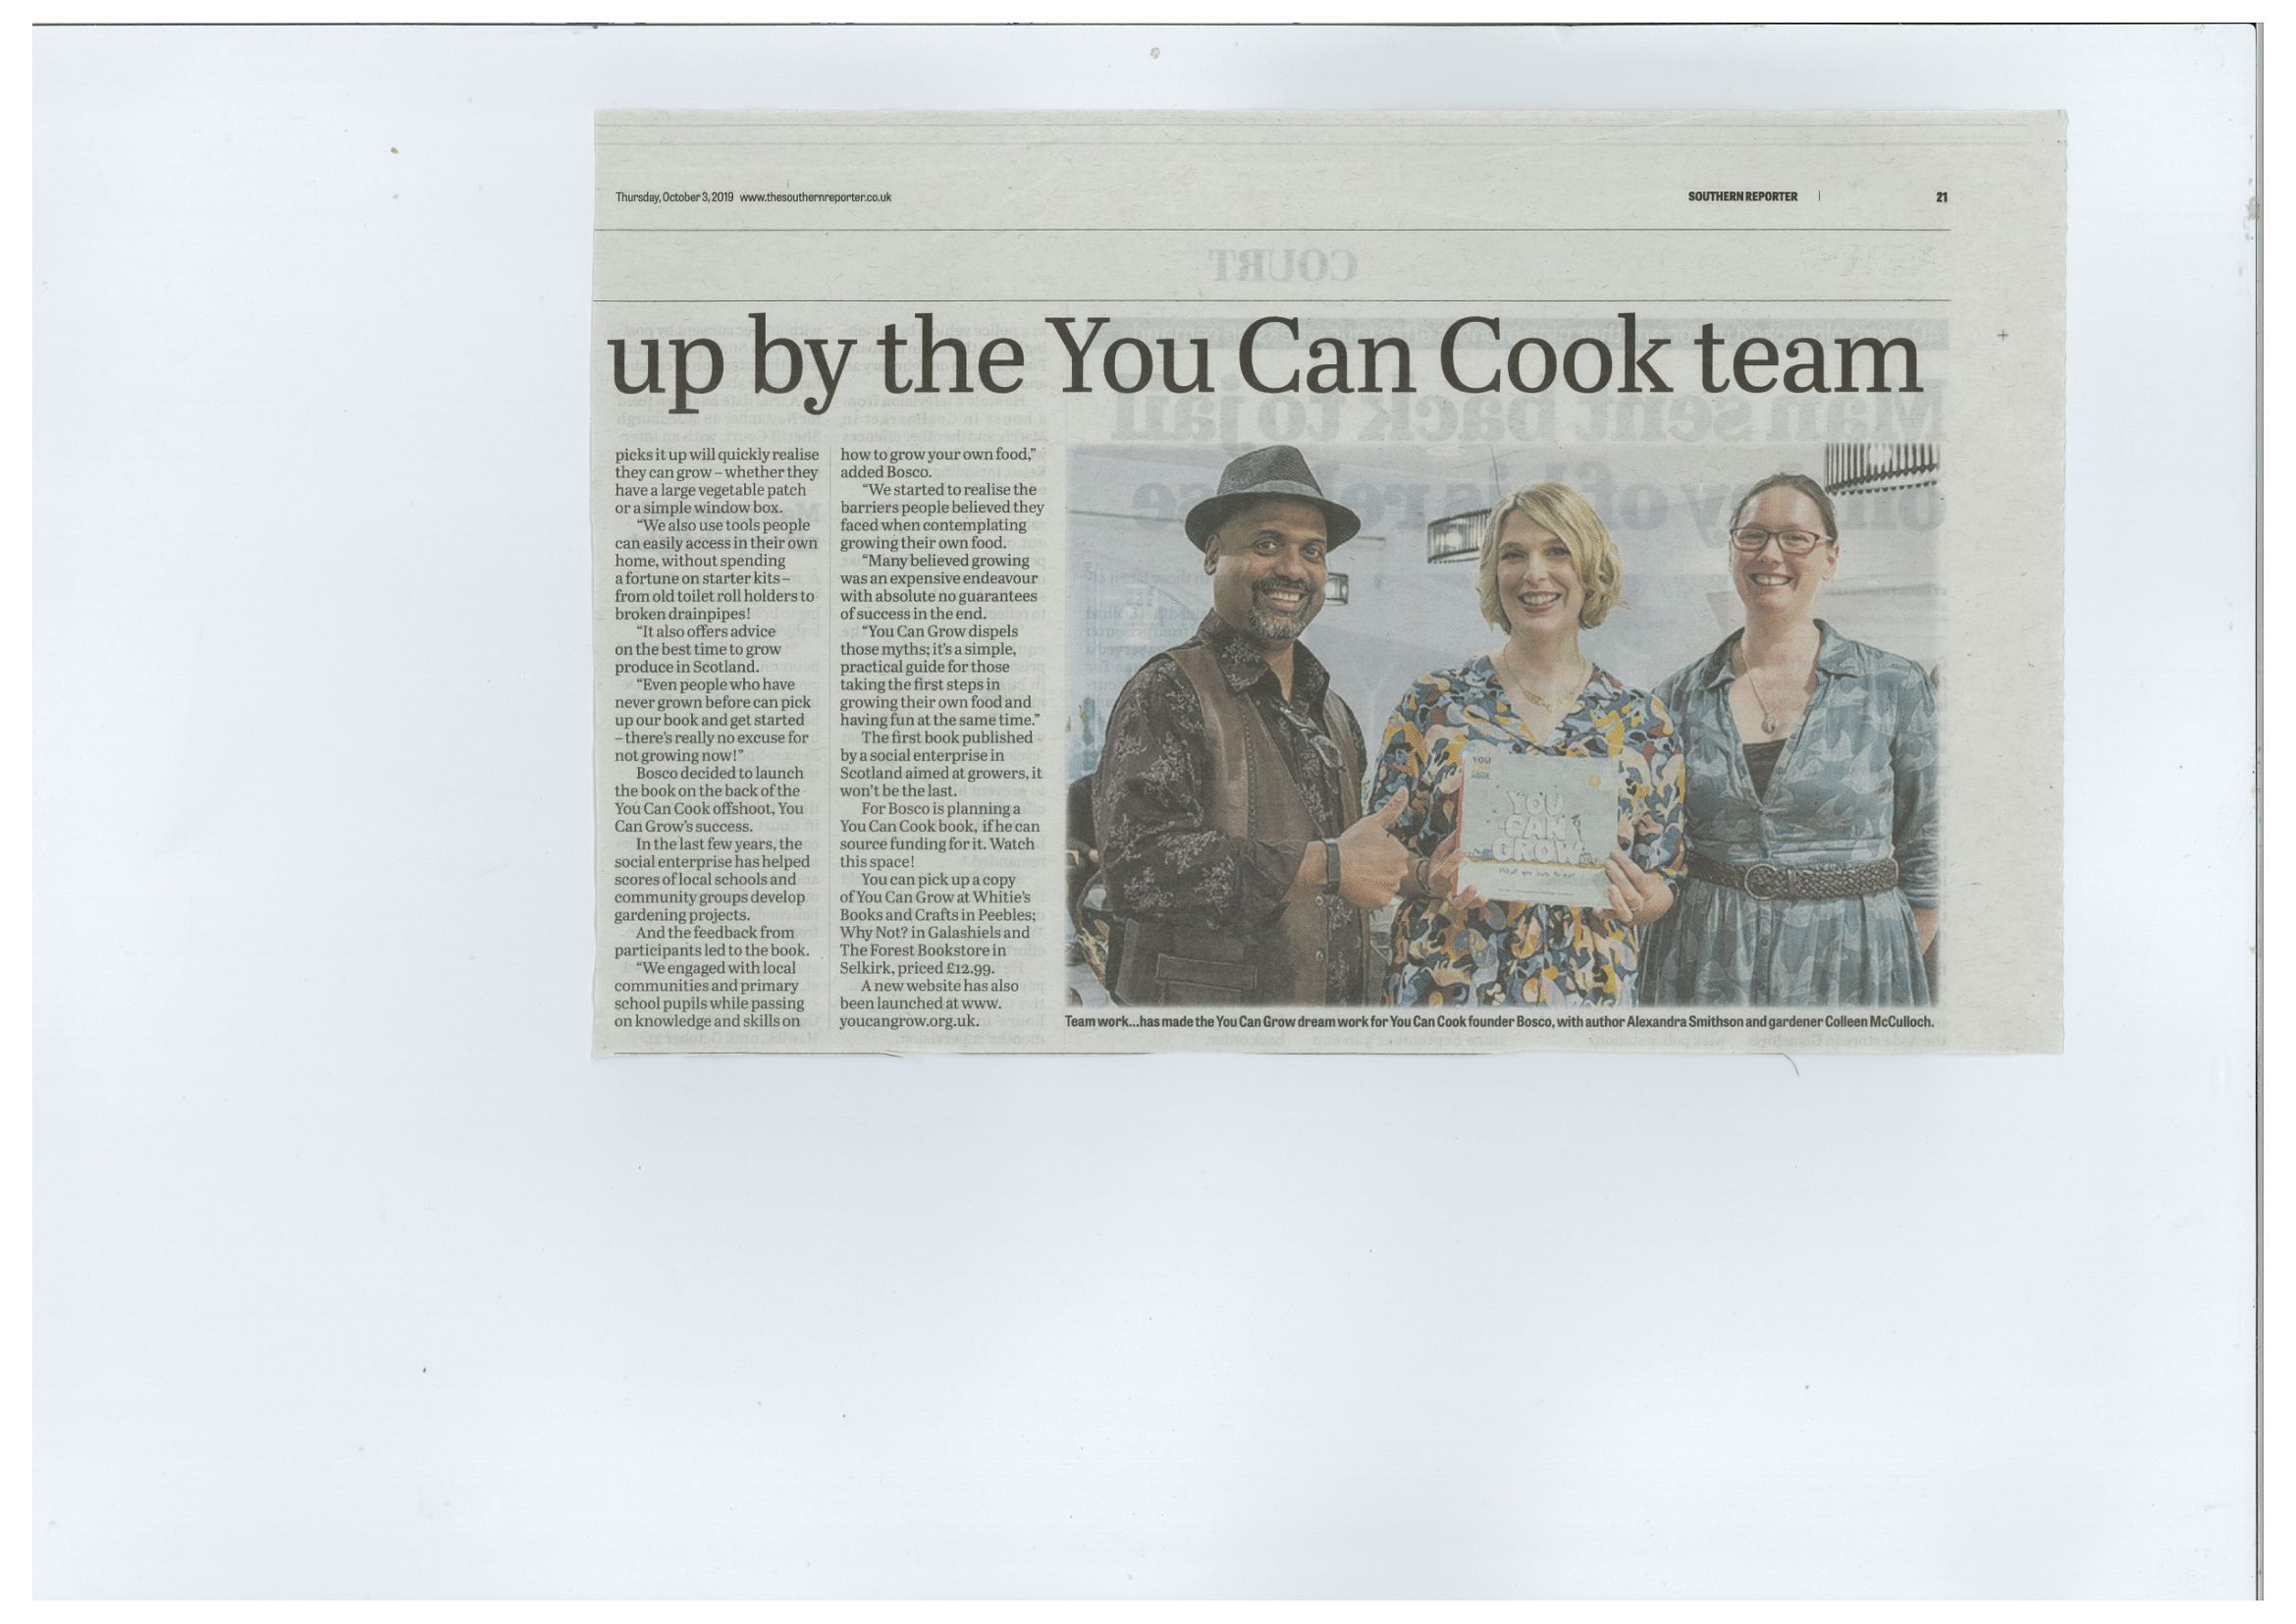 Press Clipping: Another Scottish first dished up by the You Can Cook team 2/2